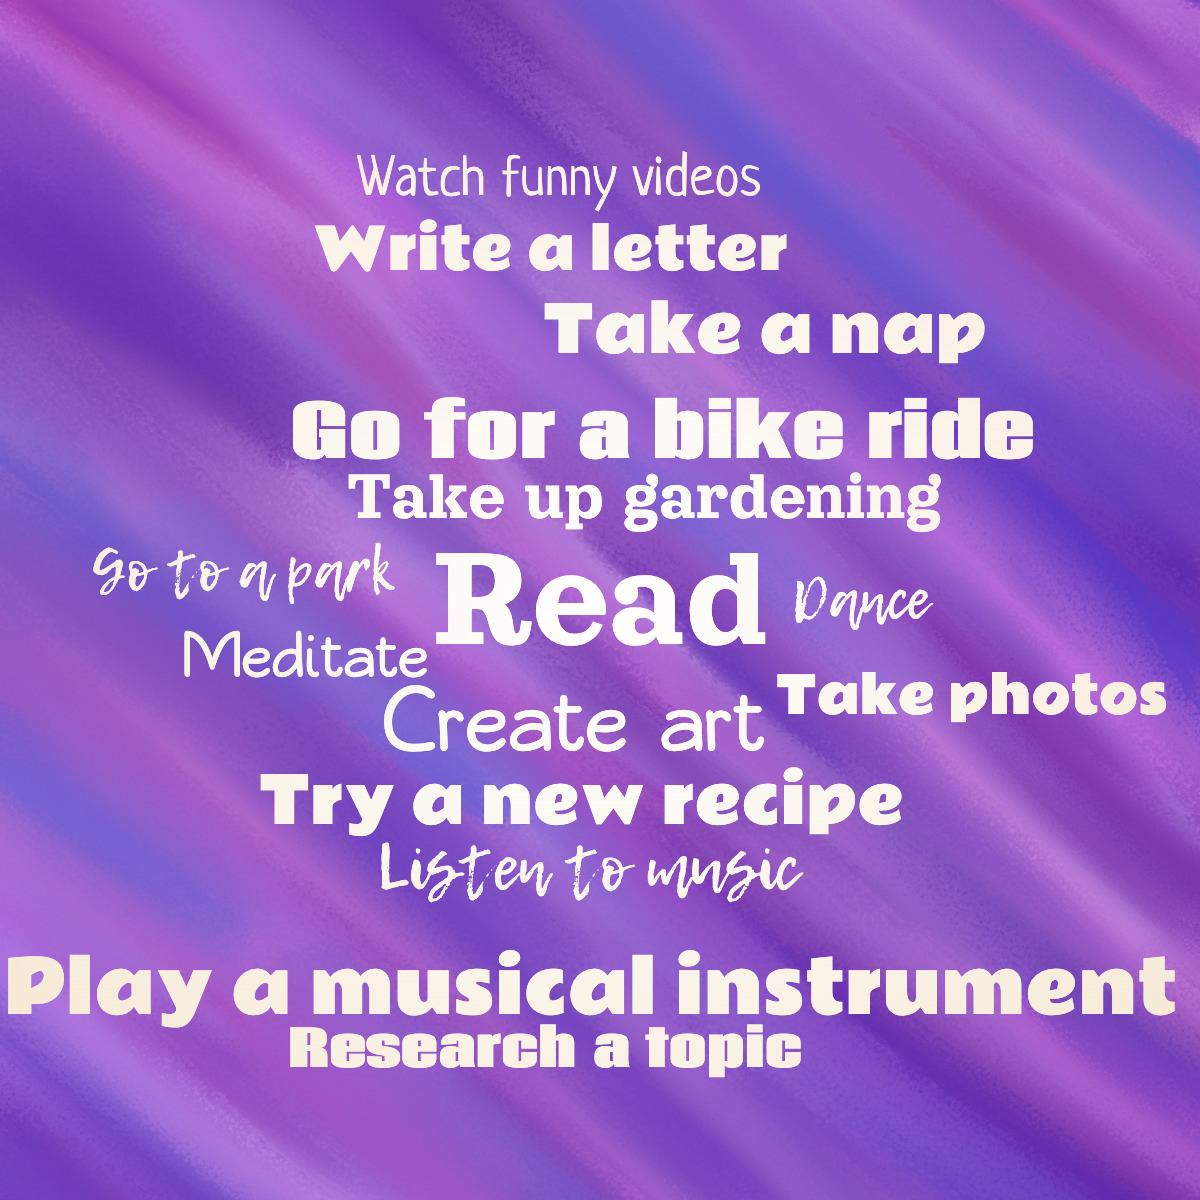 A word cloud listing fun activities such as "go to a park", "dance", "write a letter"